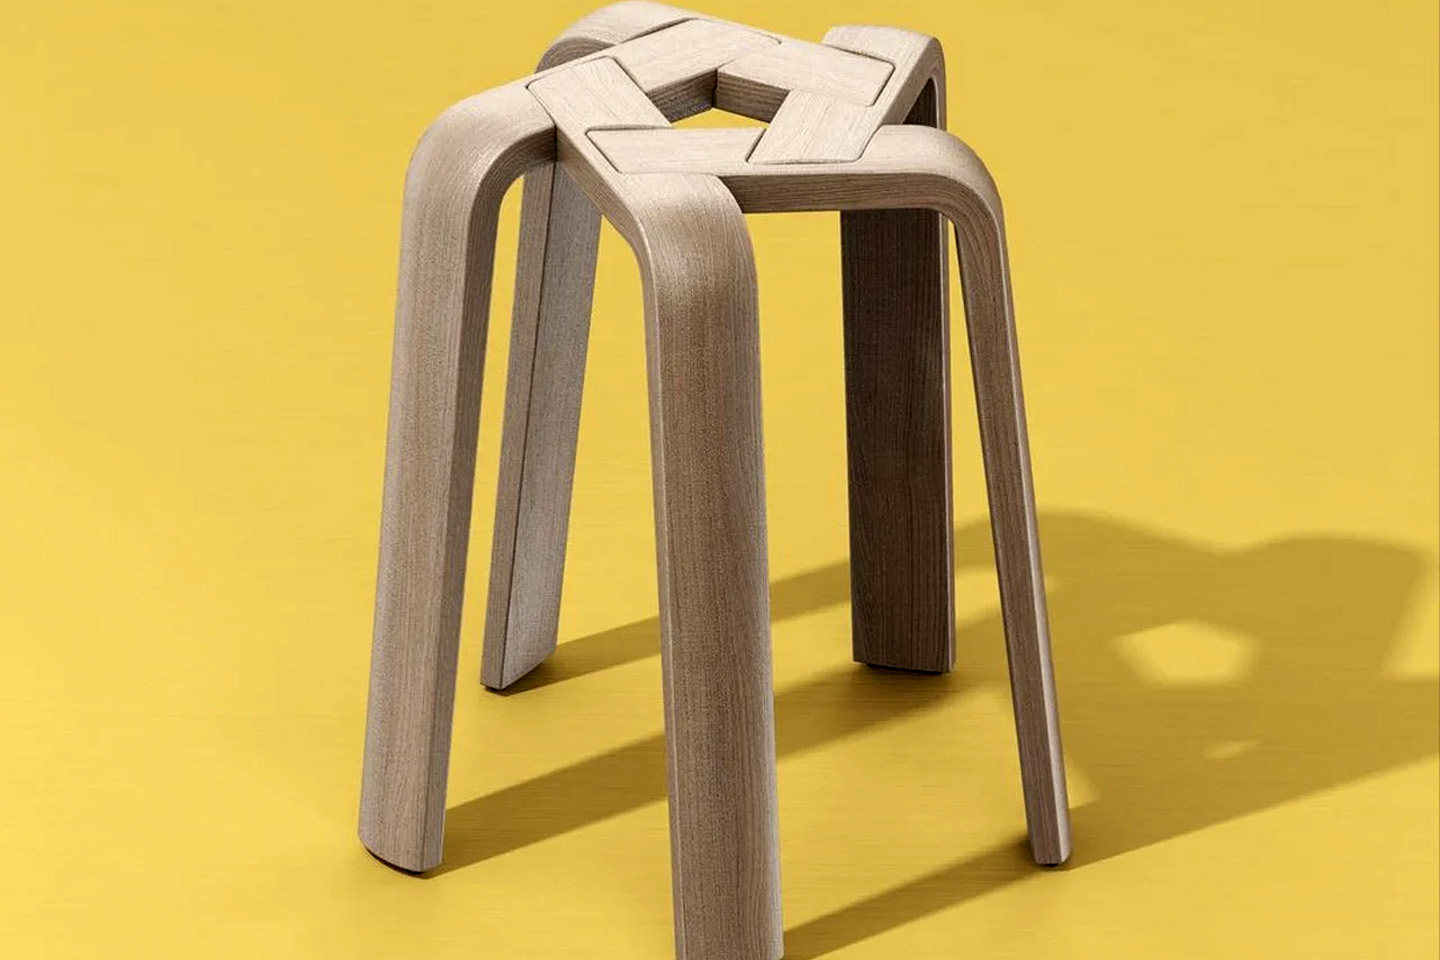 #Top 5 stool designs to replace your traditional chairs